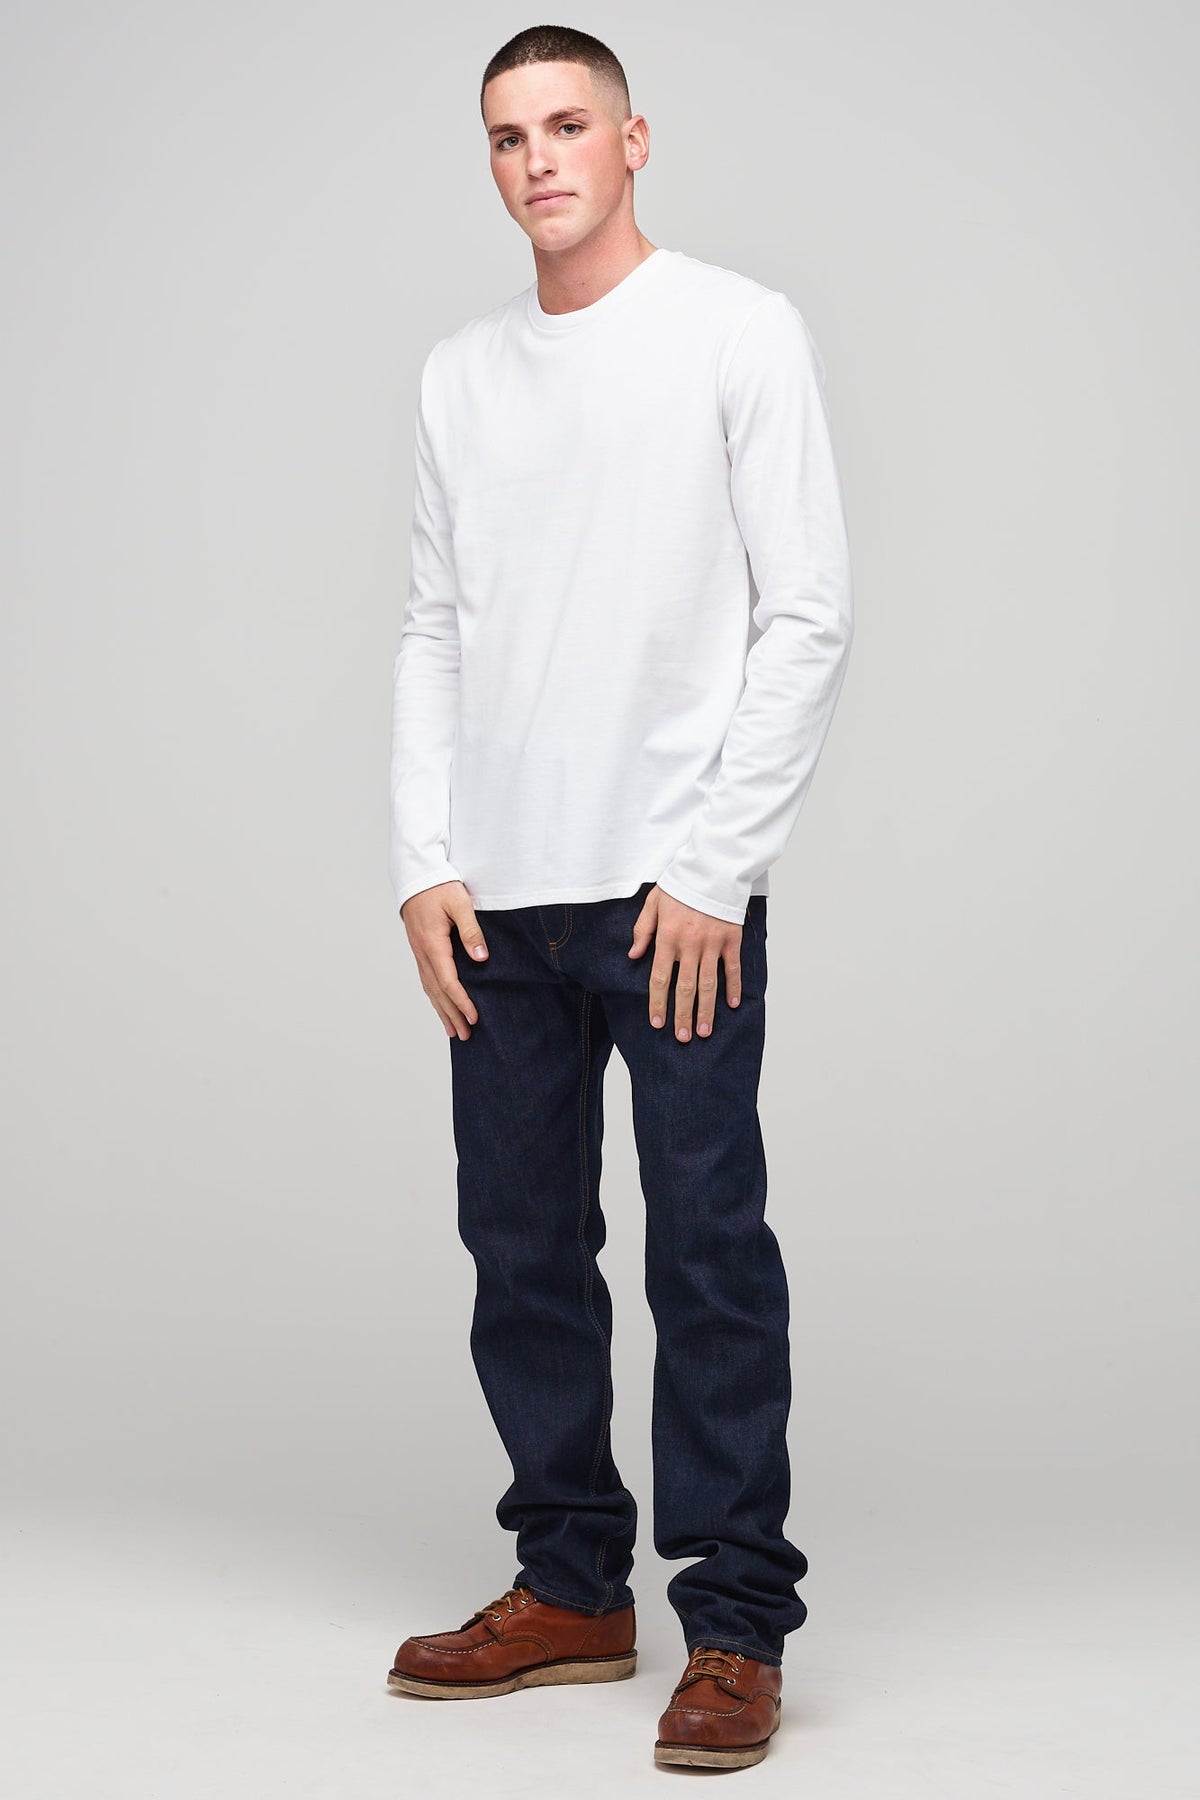 
            Brunet, white male wearing long sleeve t-shirt white over denim jeans and brown leather shoes